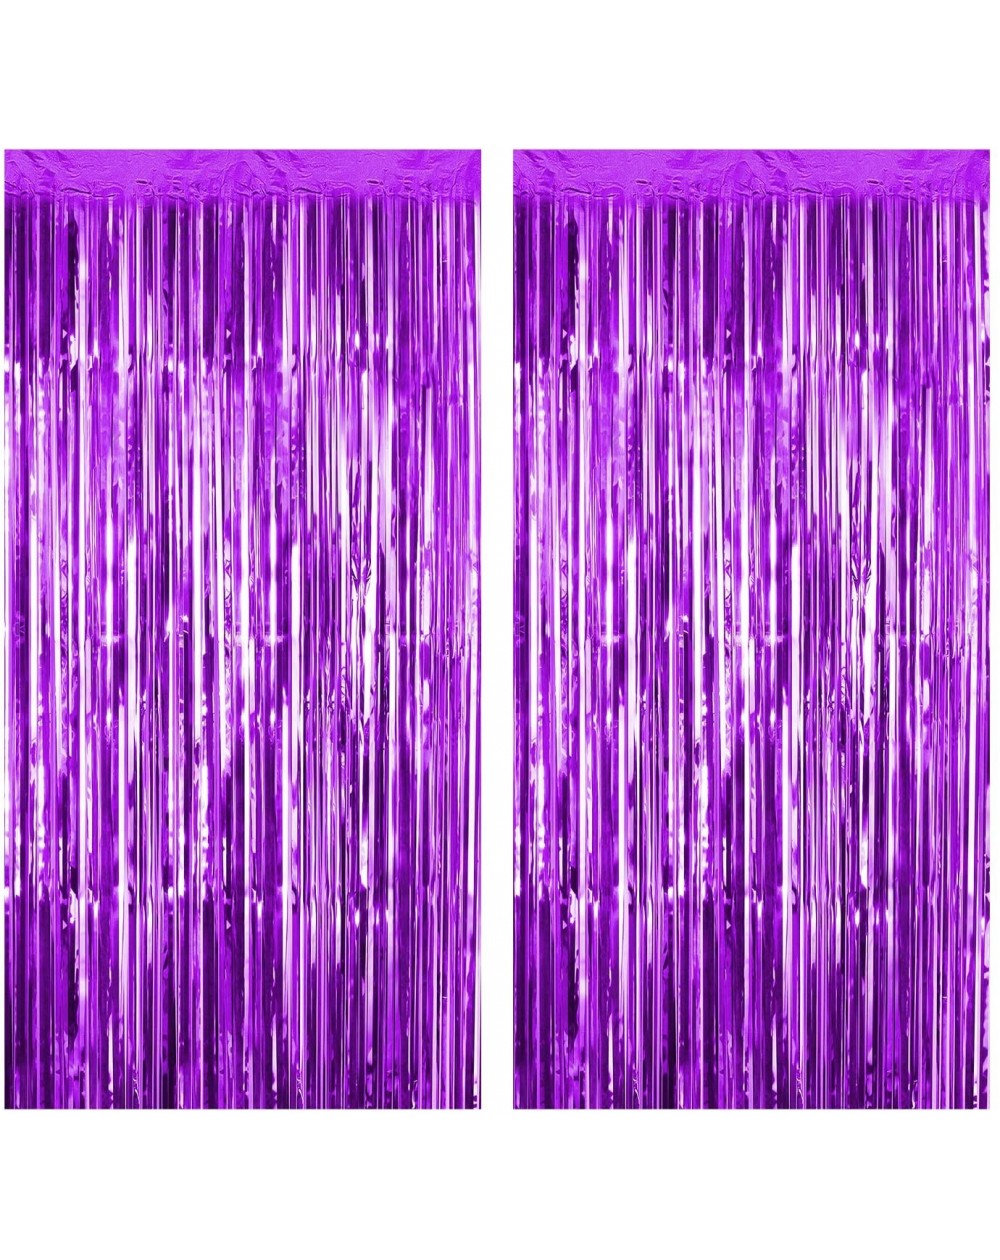 Photobooth Props Foil Fringe Curtains Metallic Tinsel Mylar Curtain for Party Photo Backdrop Wedding Decor (Purple- 2-Pack) -...